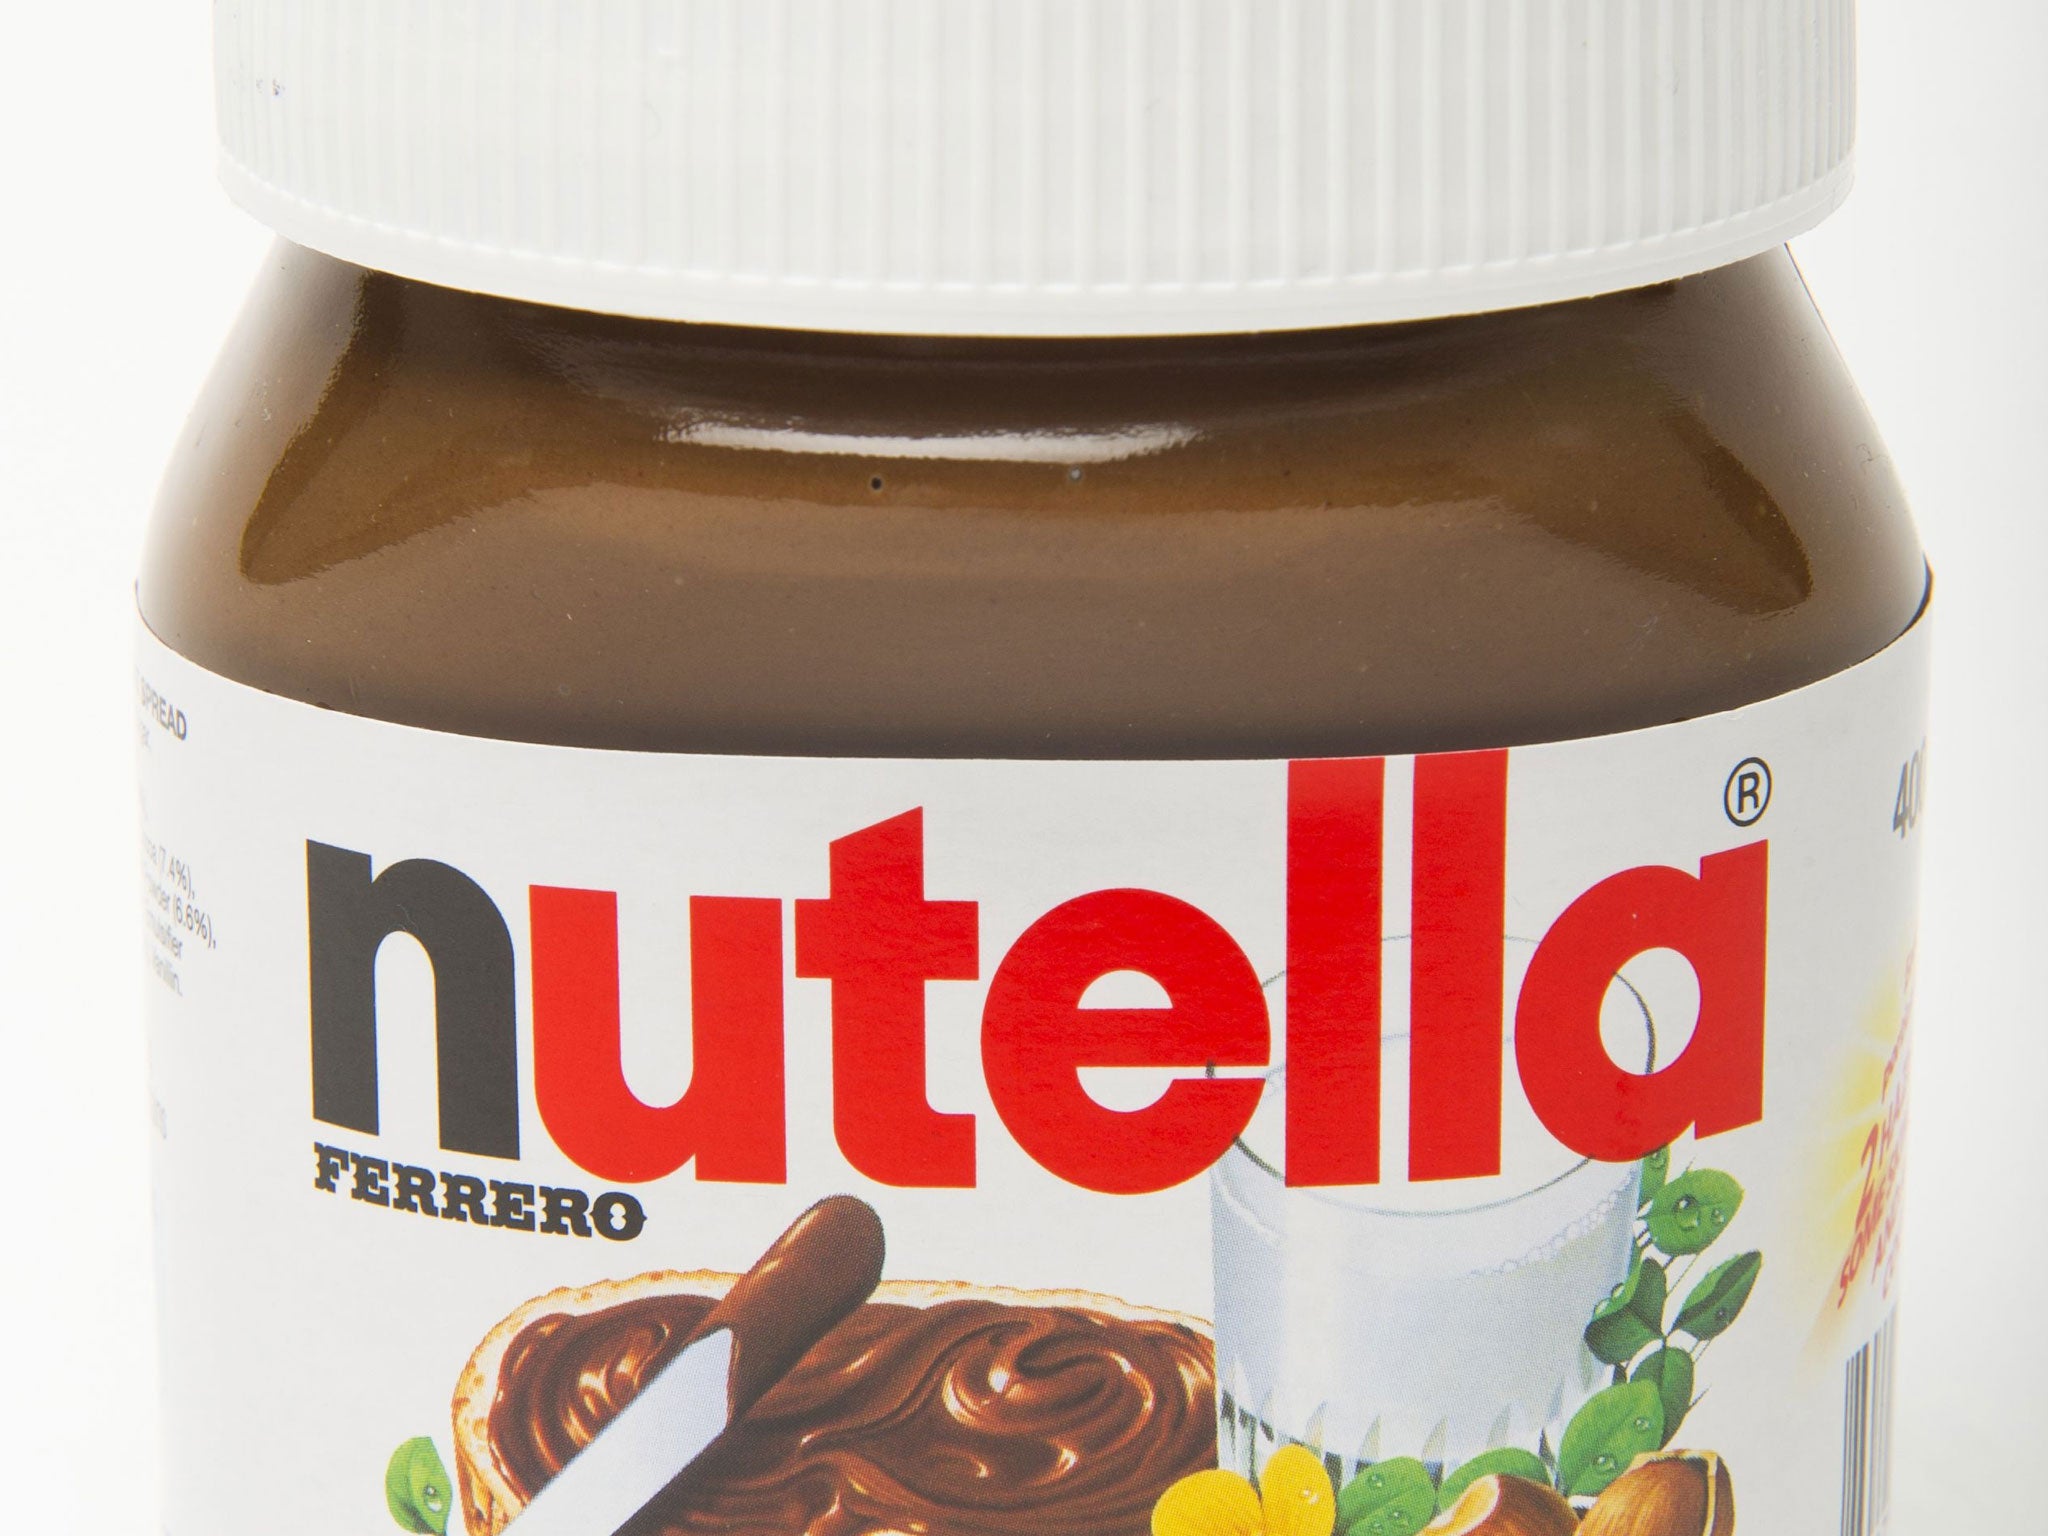 Five tons of Nutella was lifted from a lorry in Niederaula